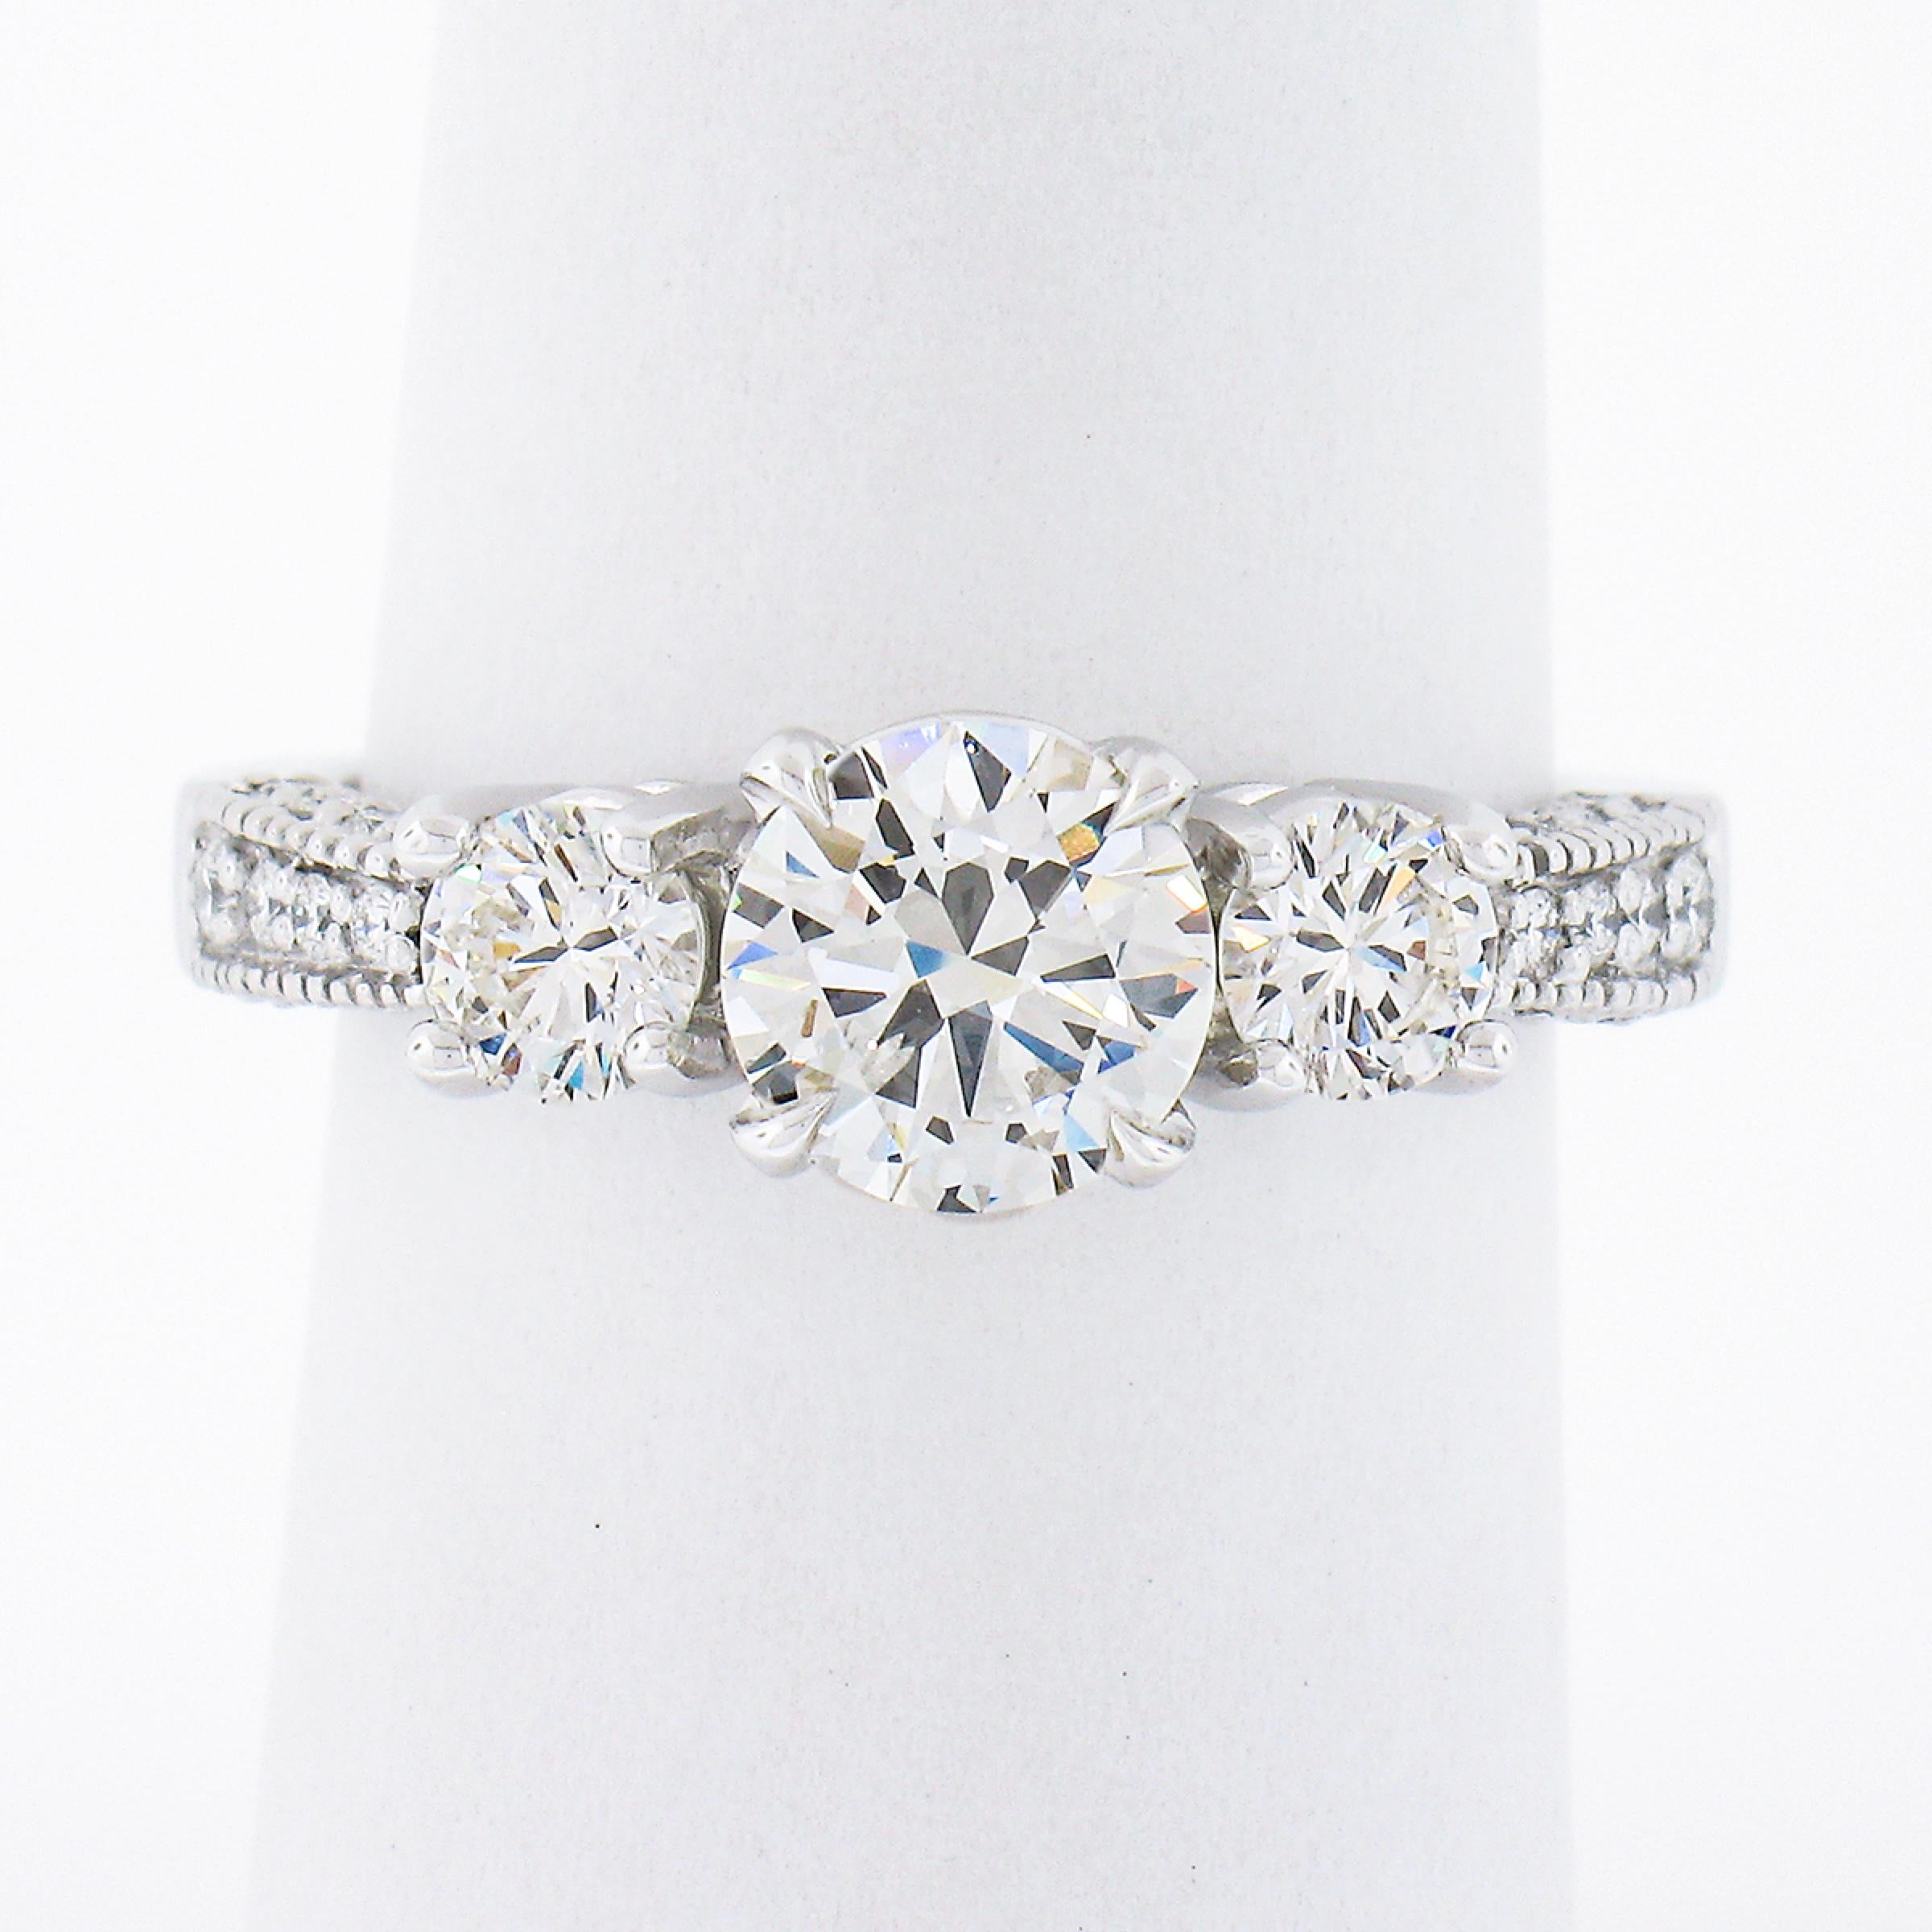 This elegant and chic three stone diamond engagement ring is crafted in solid 14k white gold and features a gorgeous round brilliant cut diamond solitaire, claw-prong set at the center of the design. This center stone is GIA certified, weighs